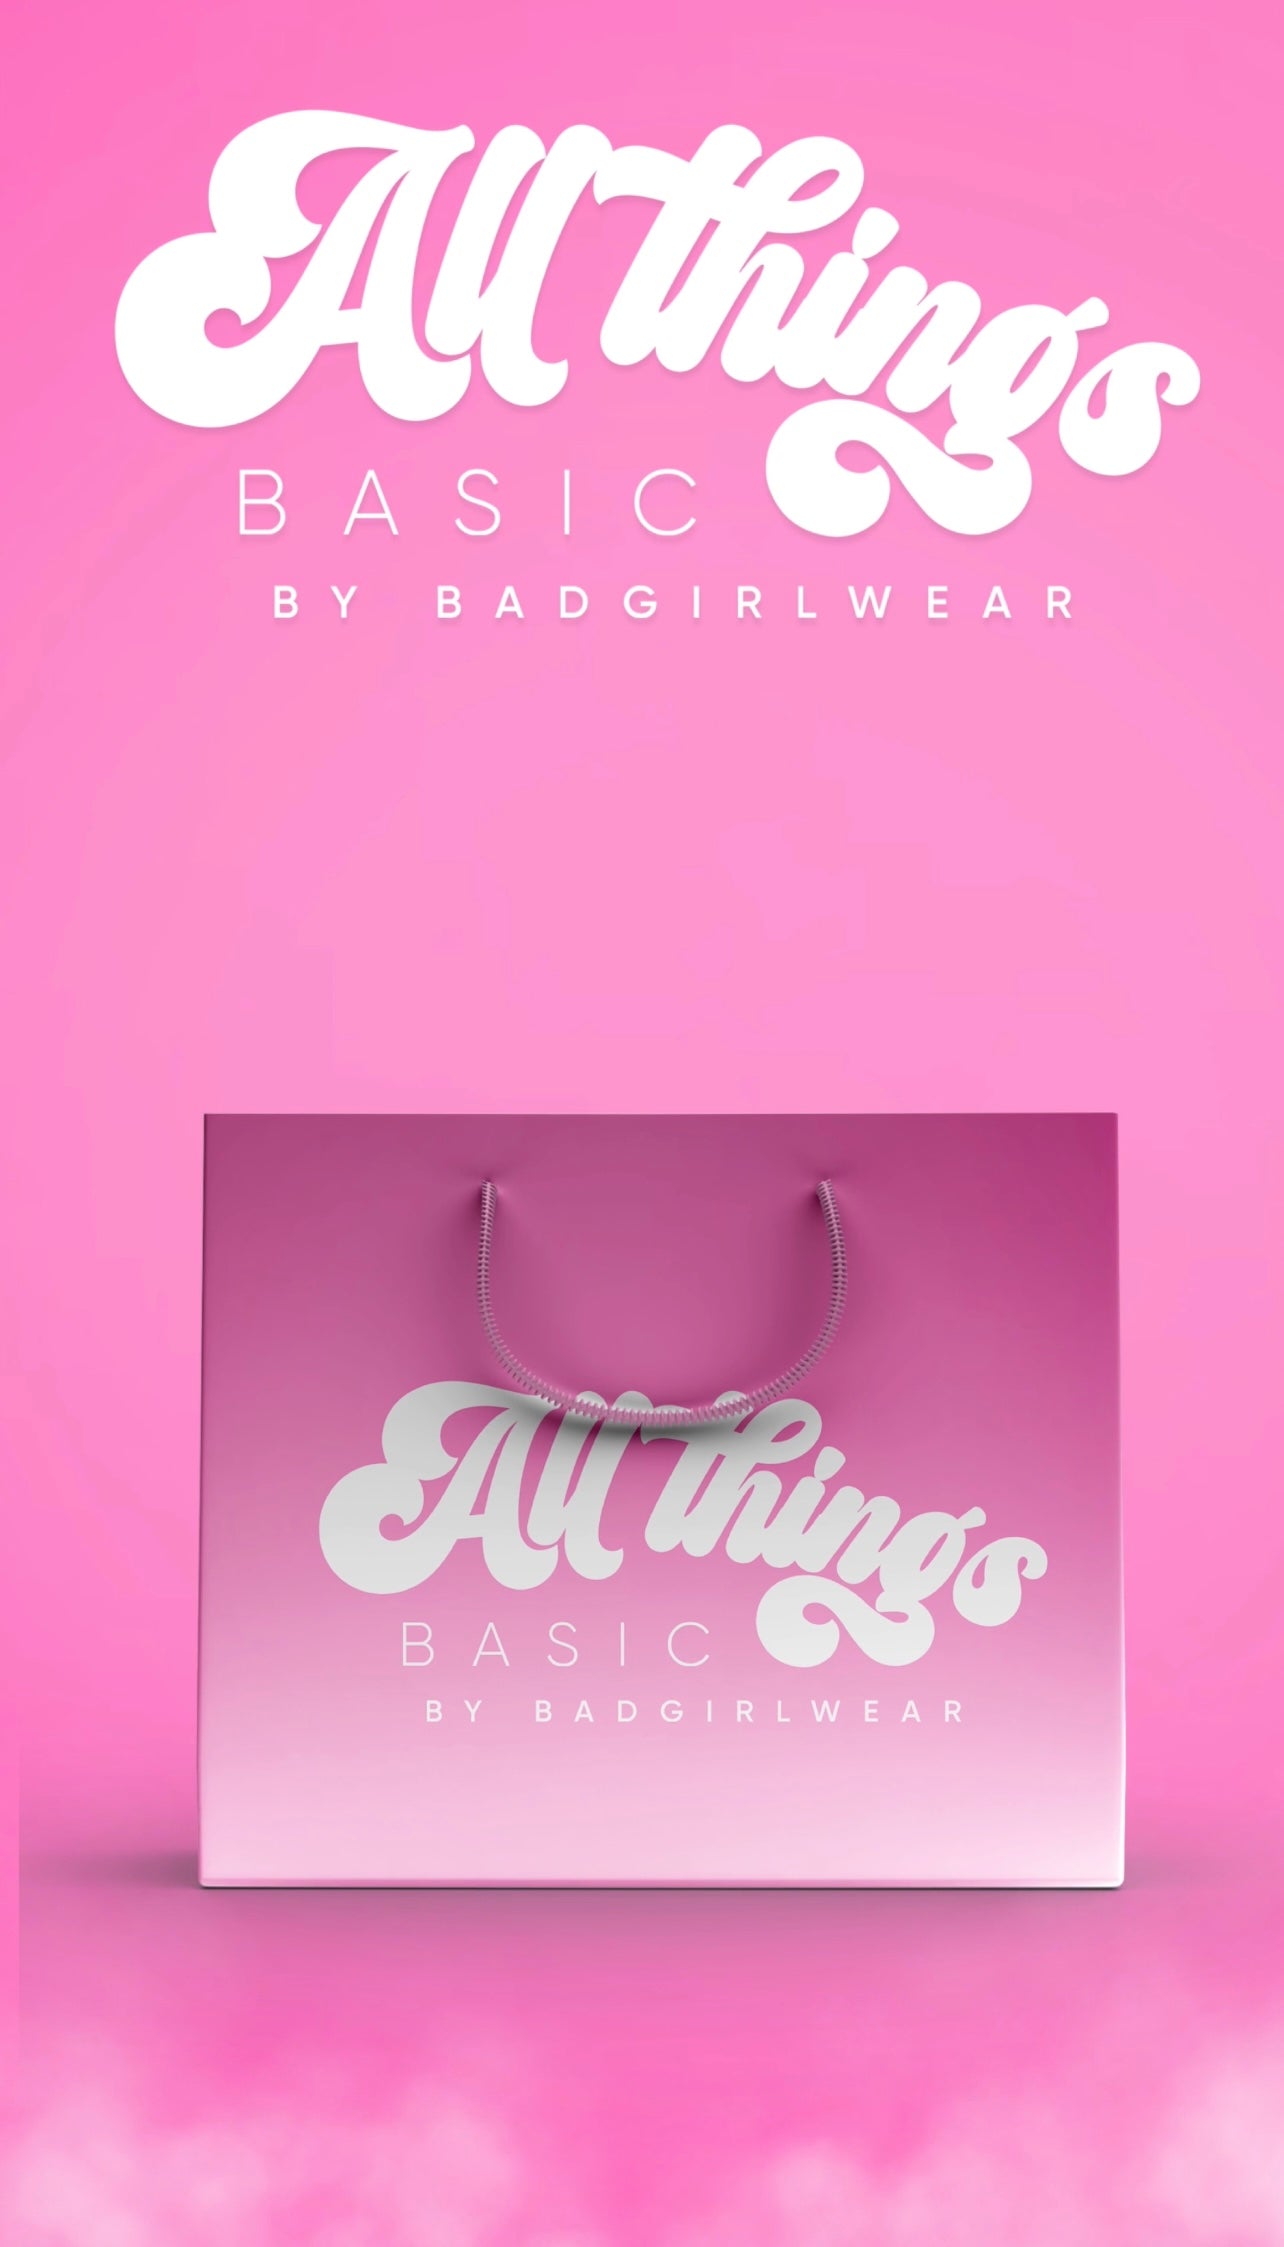 All Things Basic Bags